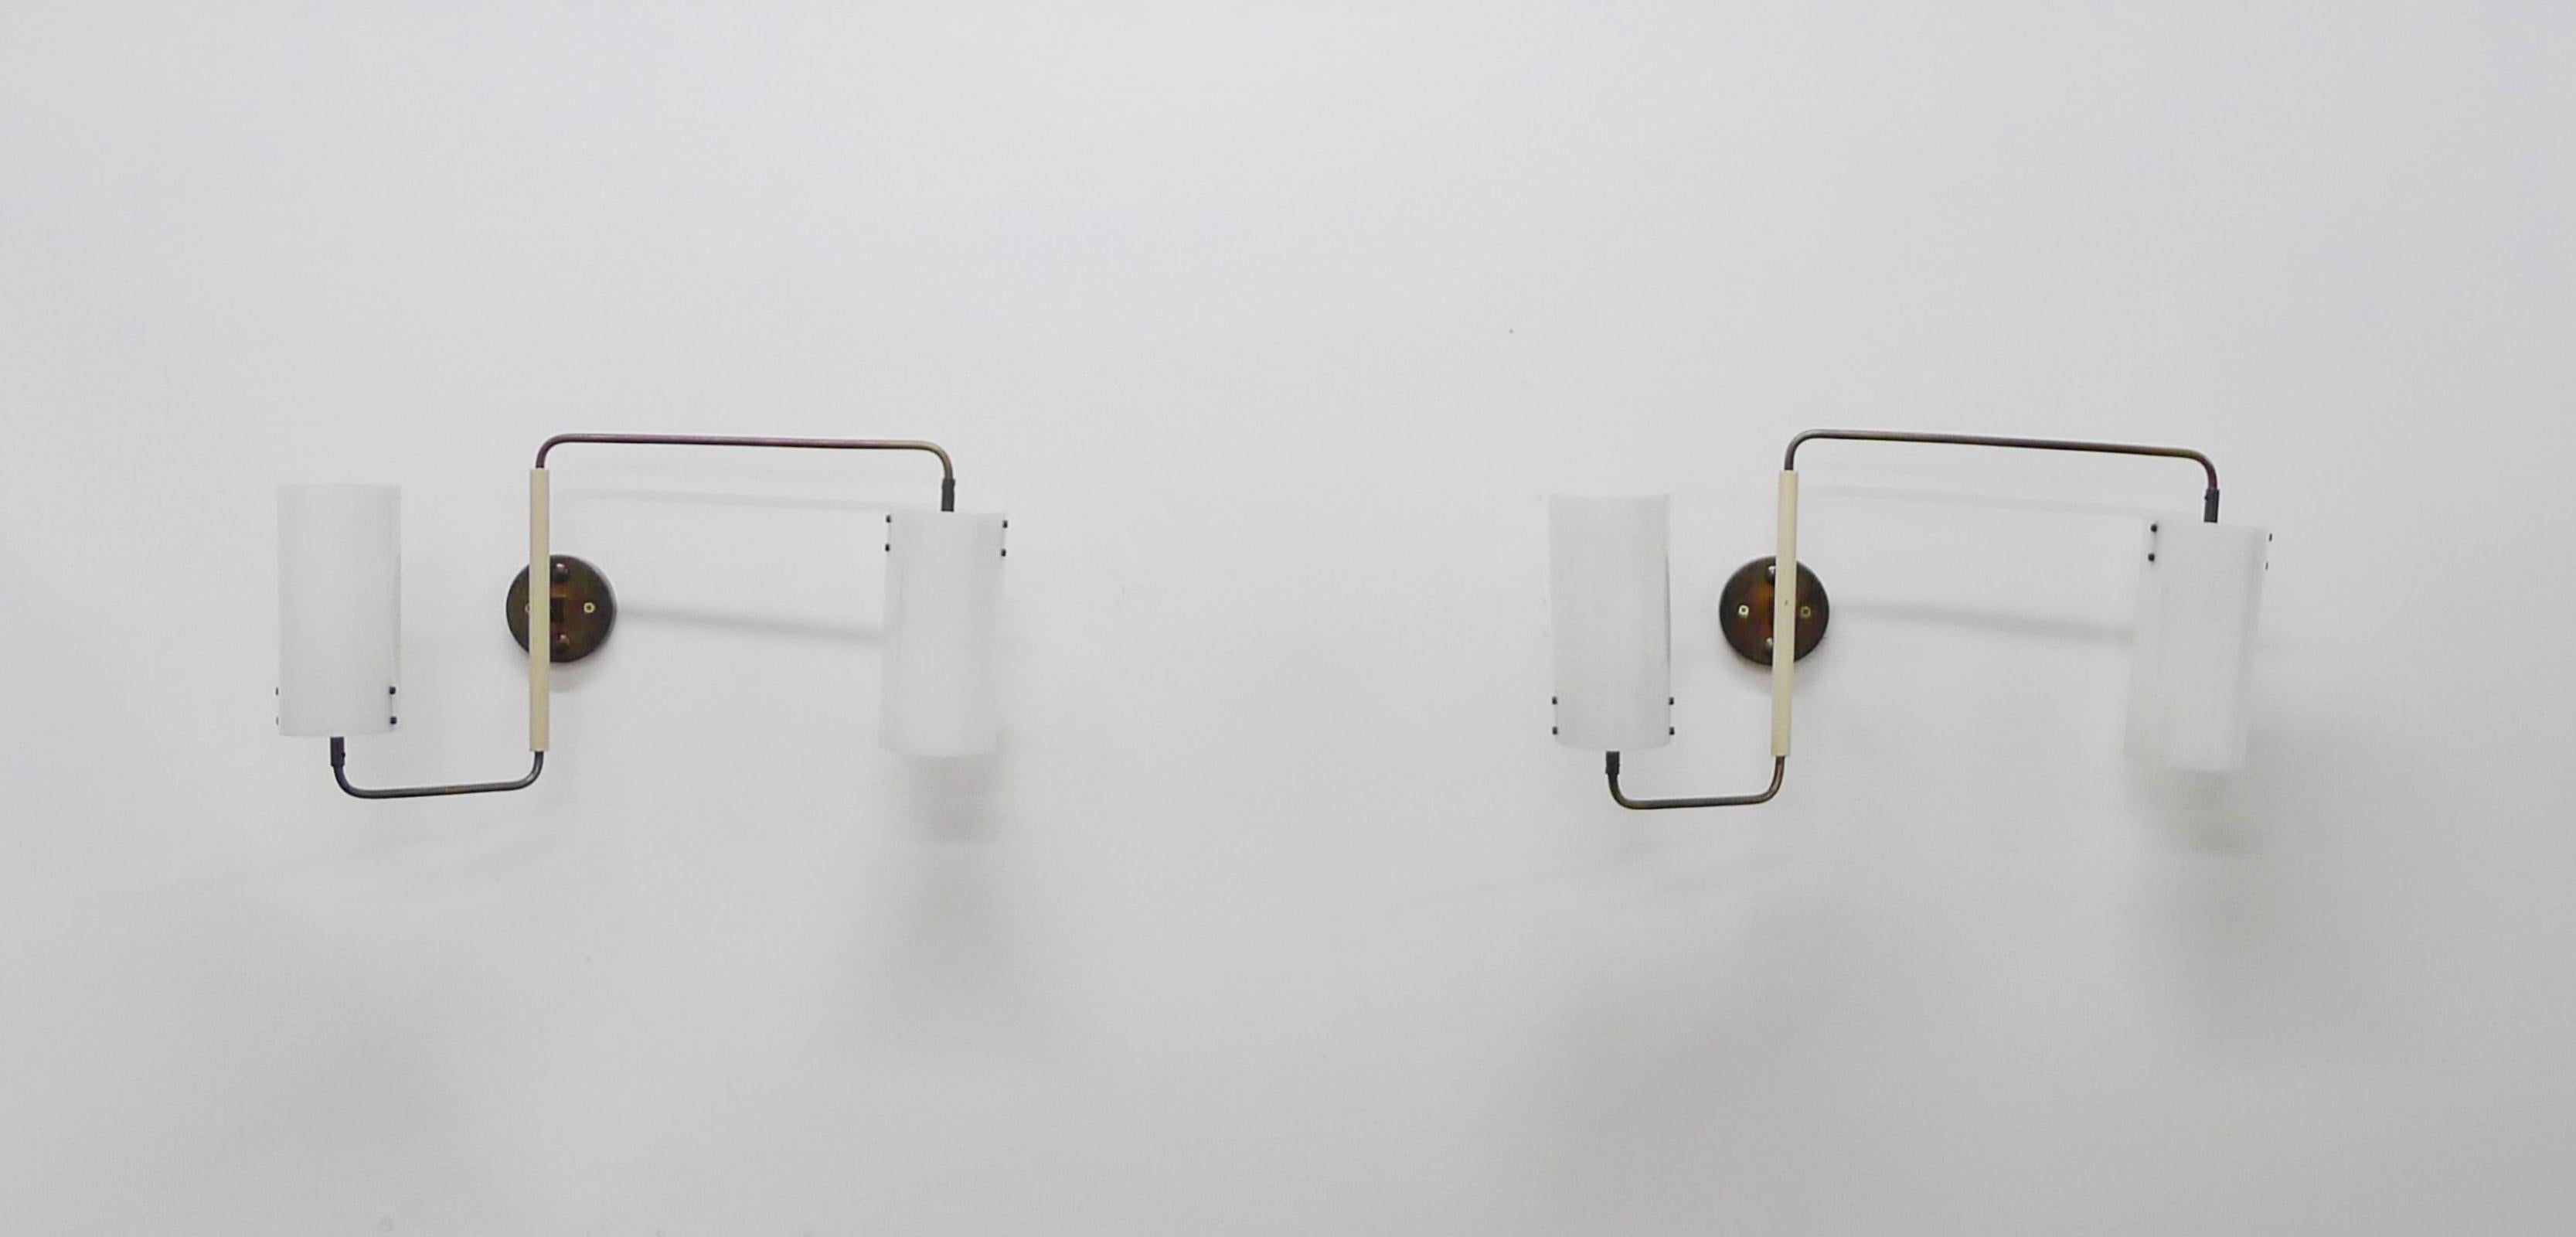 Pair of Oluce Twin-Shade Adjustable Wall Lights, Designed by Tito Agnoli, 1955 For Sale 1